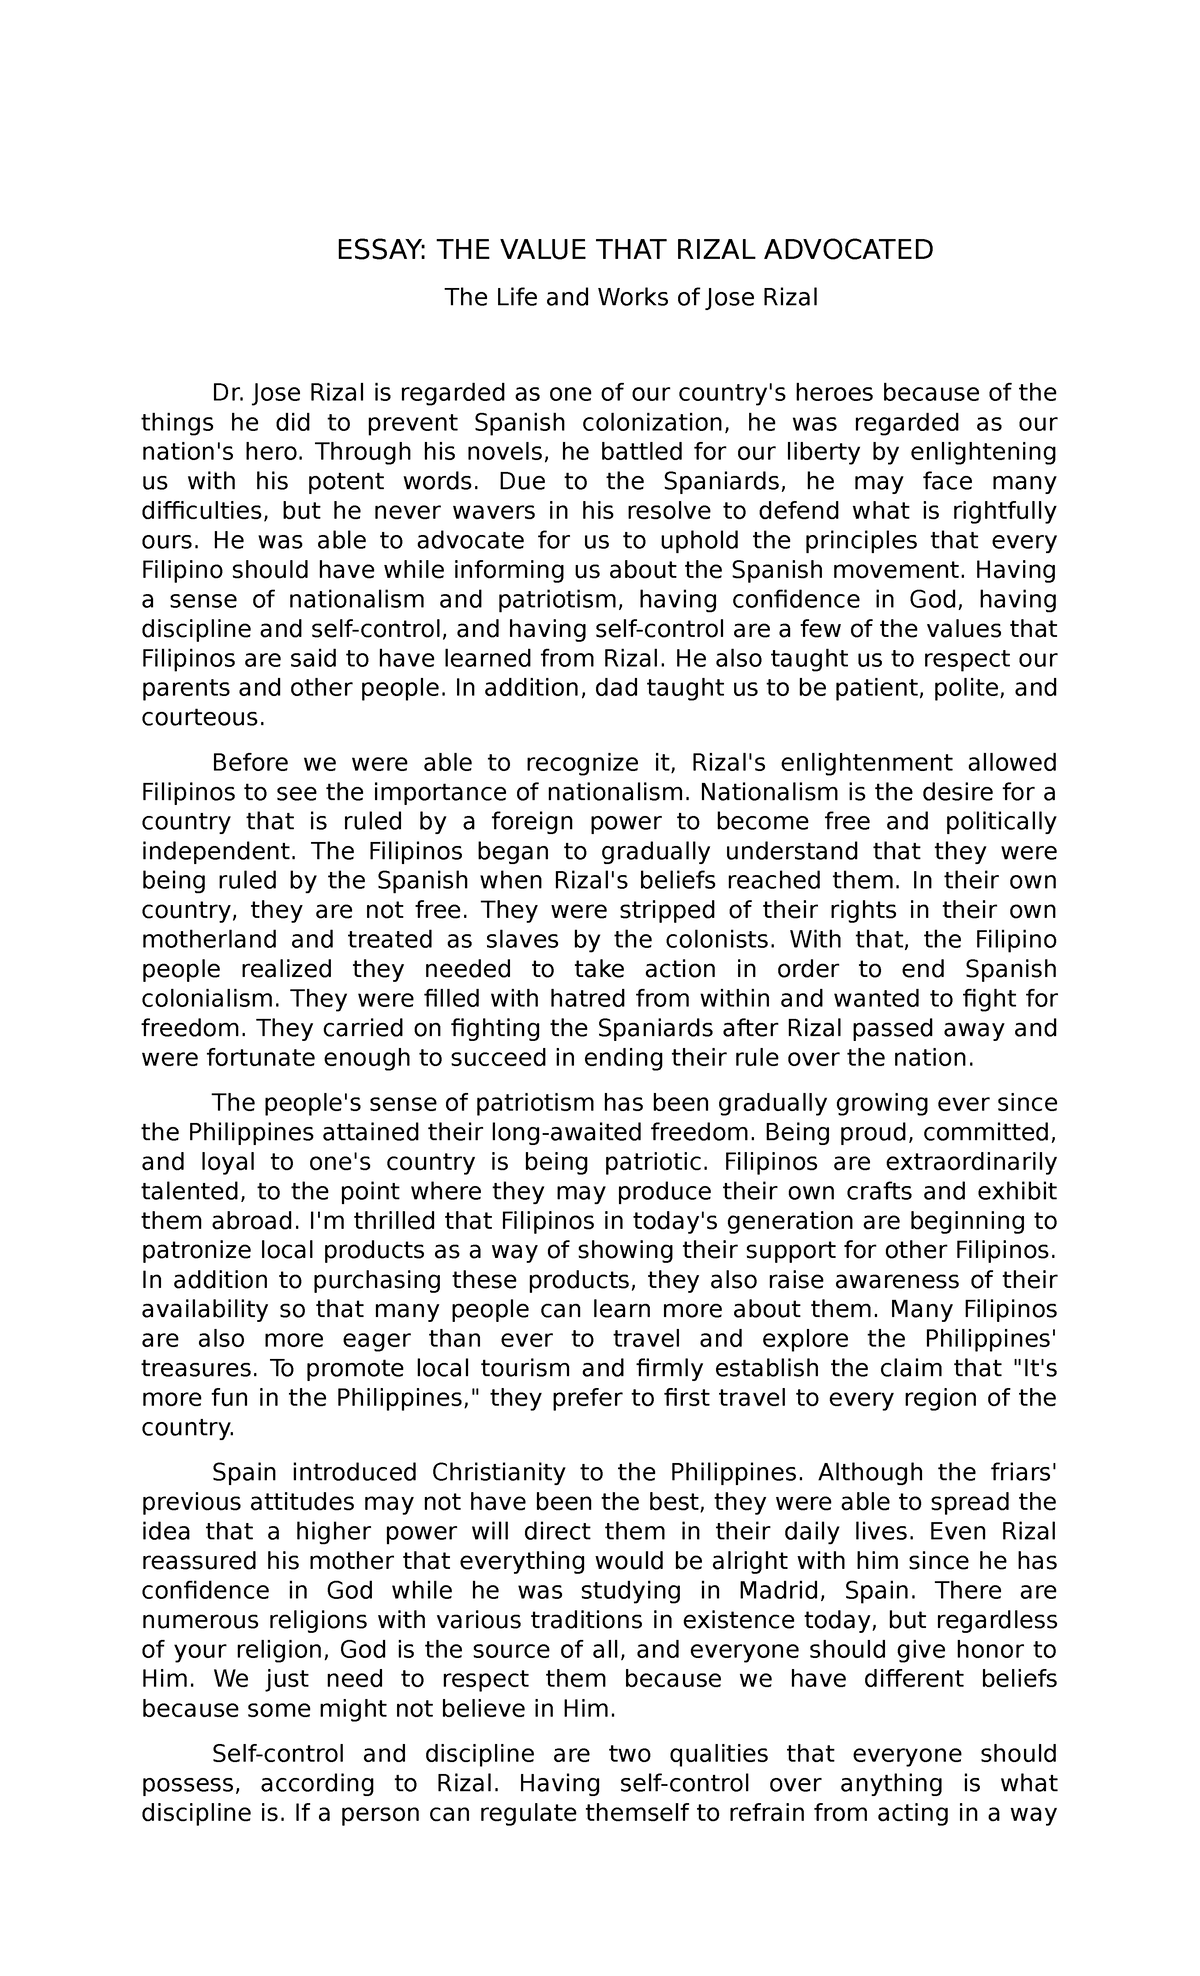 essay writing or speech about a particular value rizal advocated